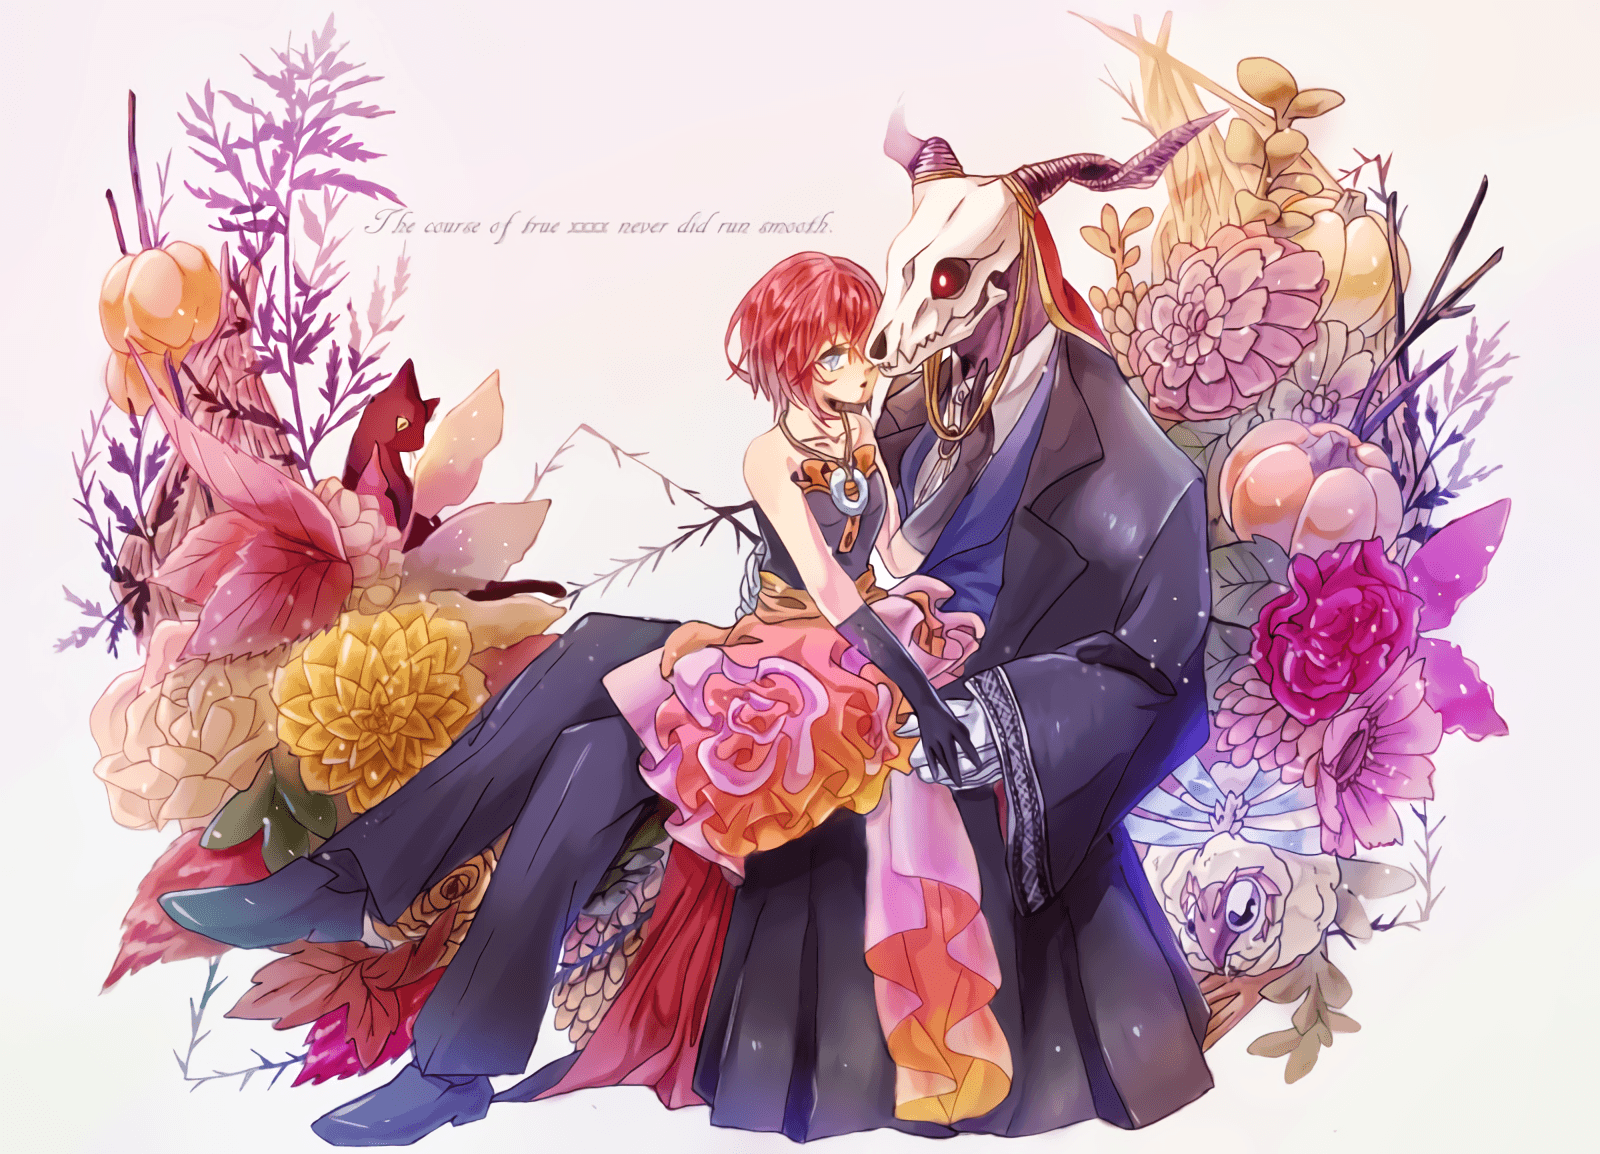 The Ancient Magus' Bride HD Wallpaper